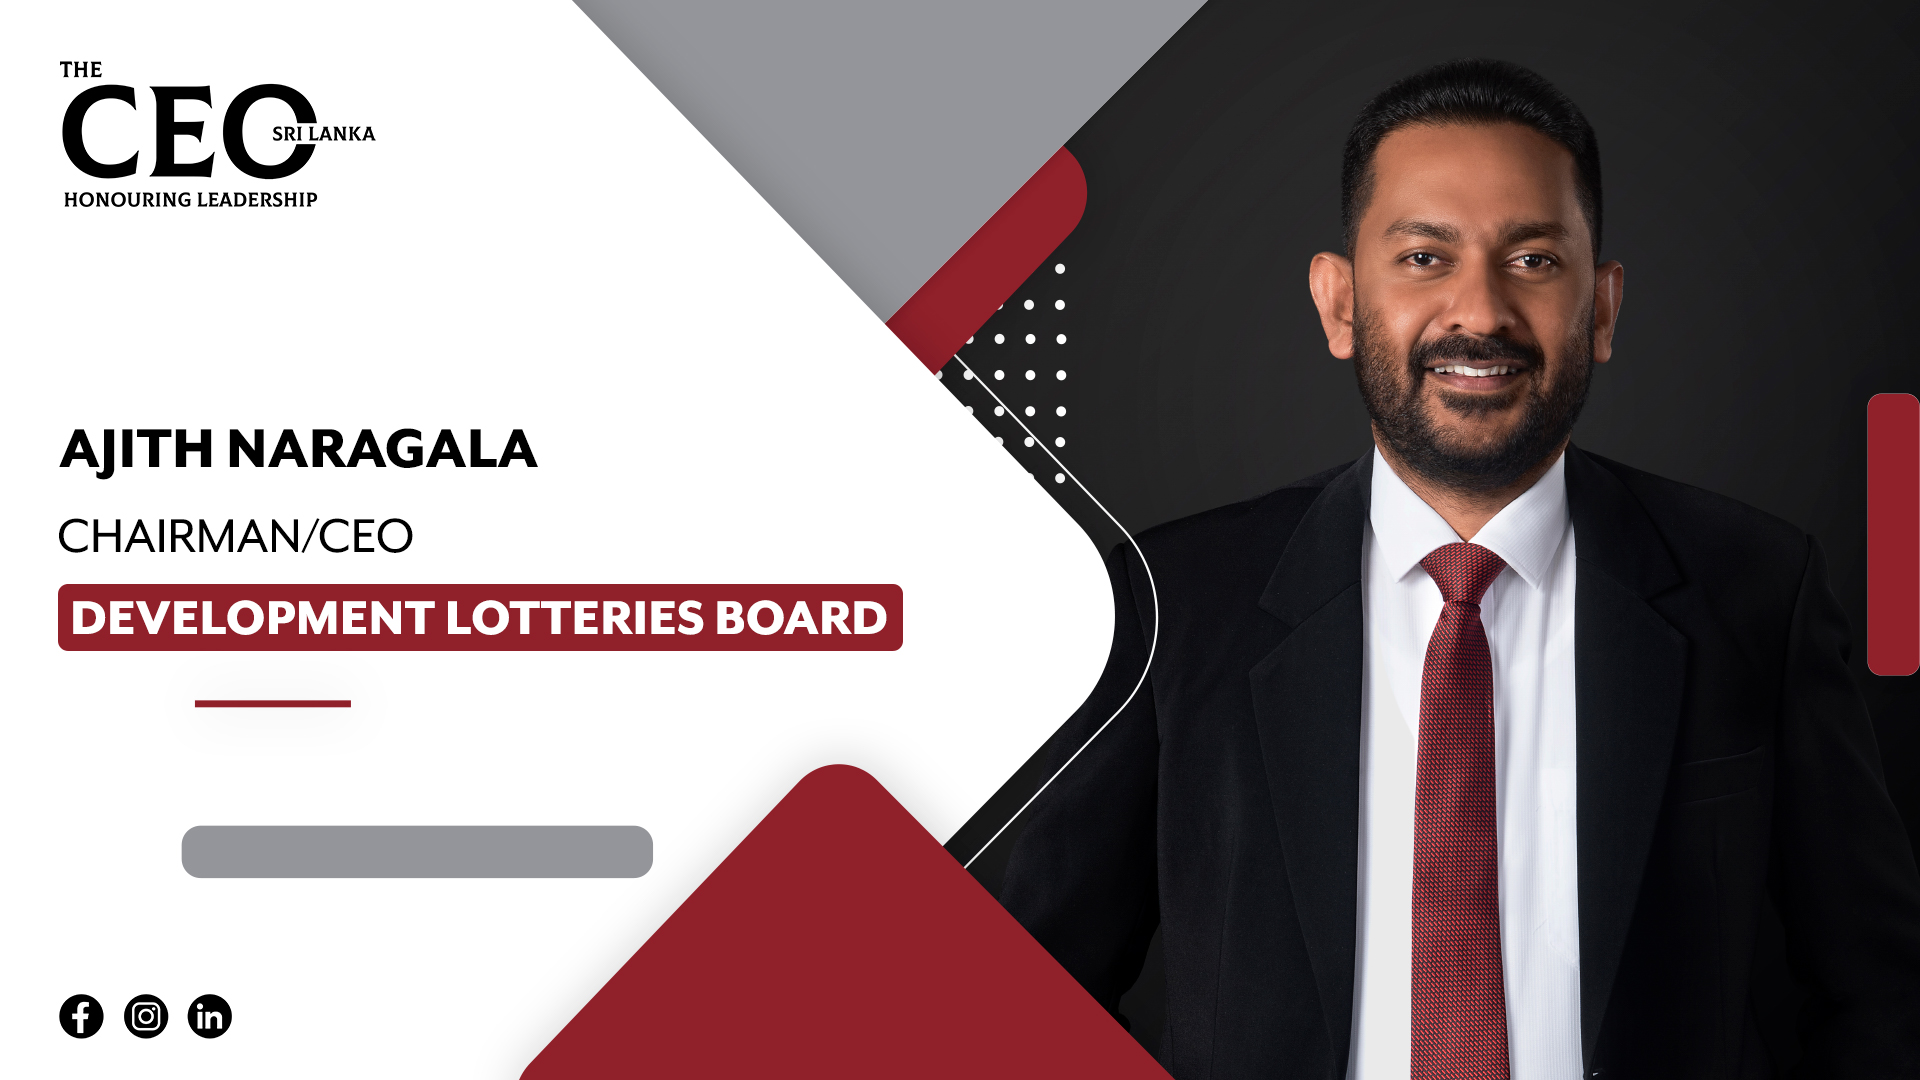 THE PASSIONATE LEADER UPLIFTING SRI LANKA’S DEVELOPMENT LOTTERIES BOARD AMID A NUMBER OF CHALLENGES